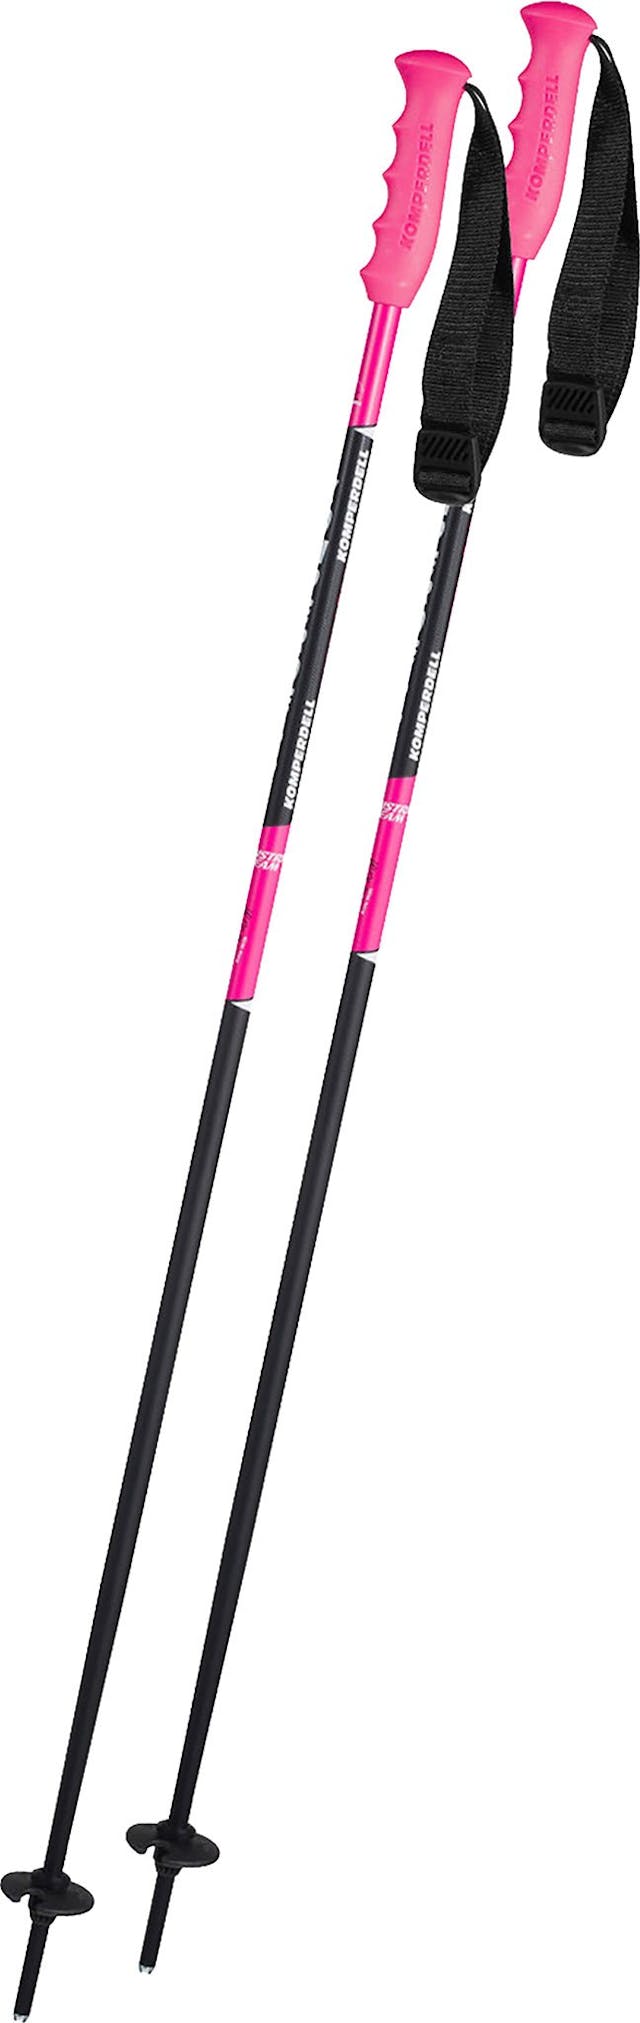 Product image for Champ Alice Ski Poles - Youth